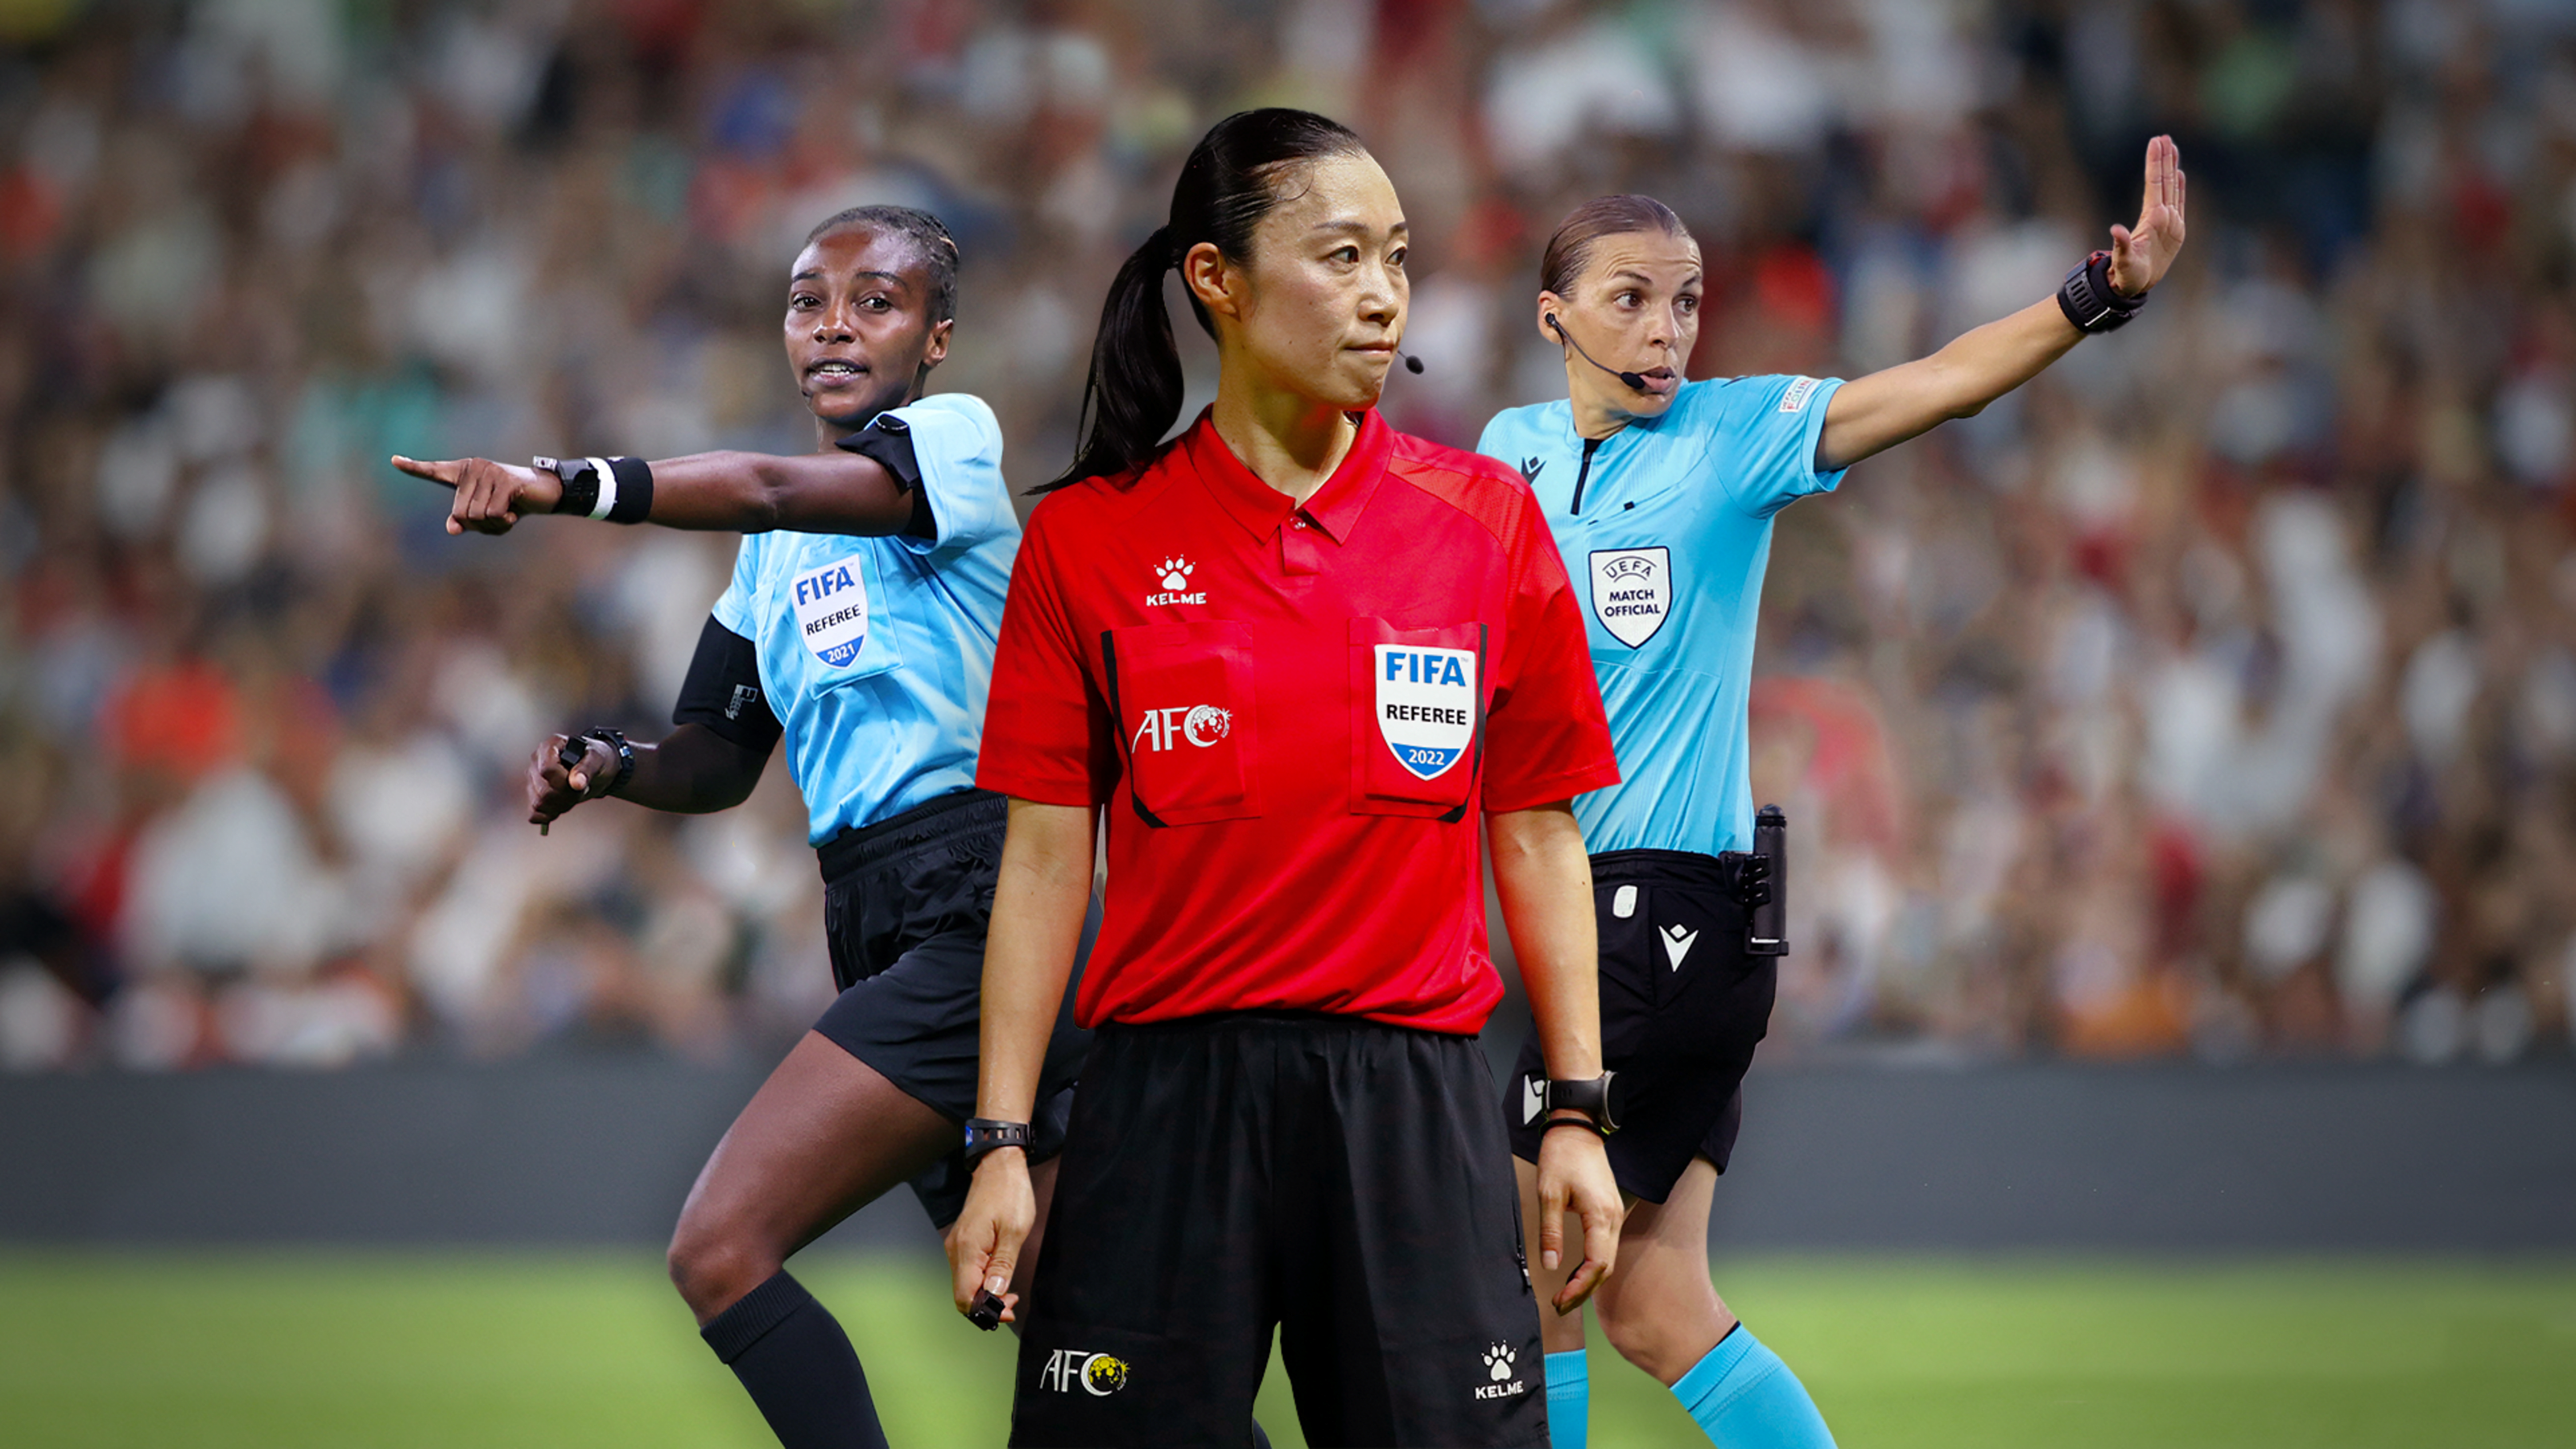 Women referees at the World Cup 2022: Top facts